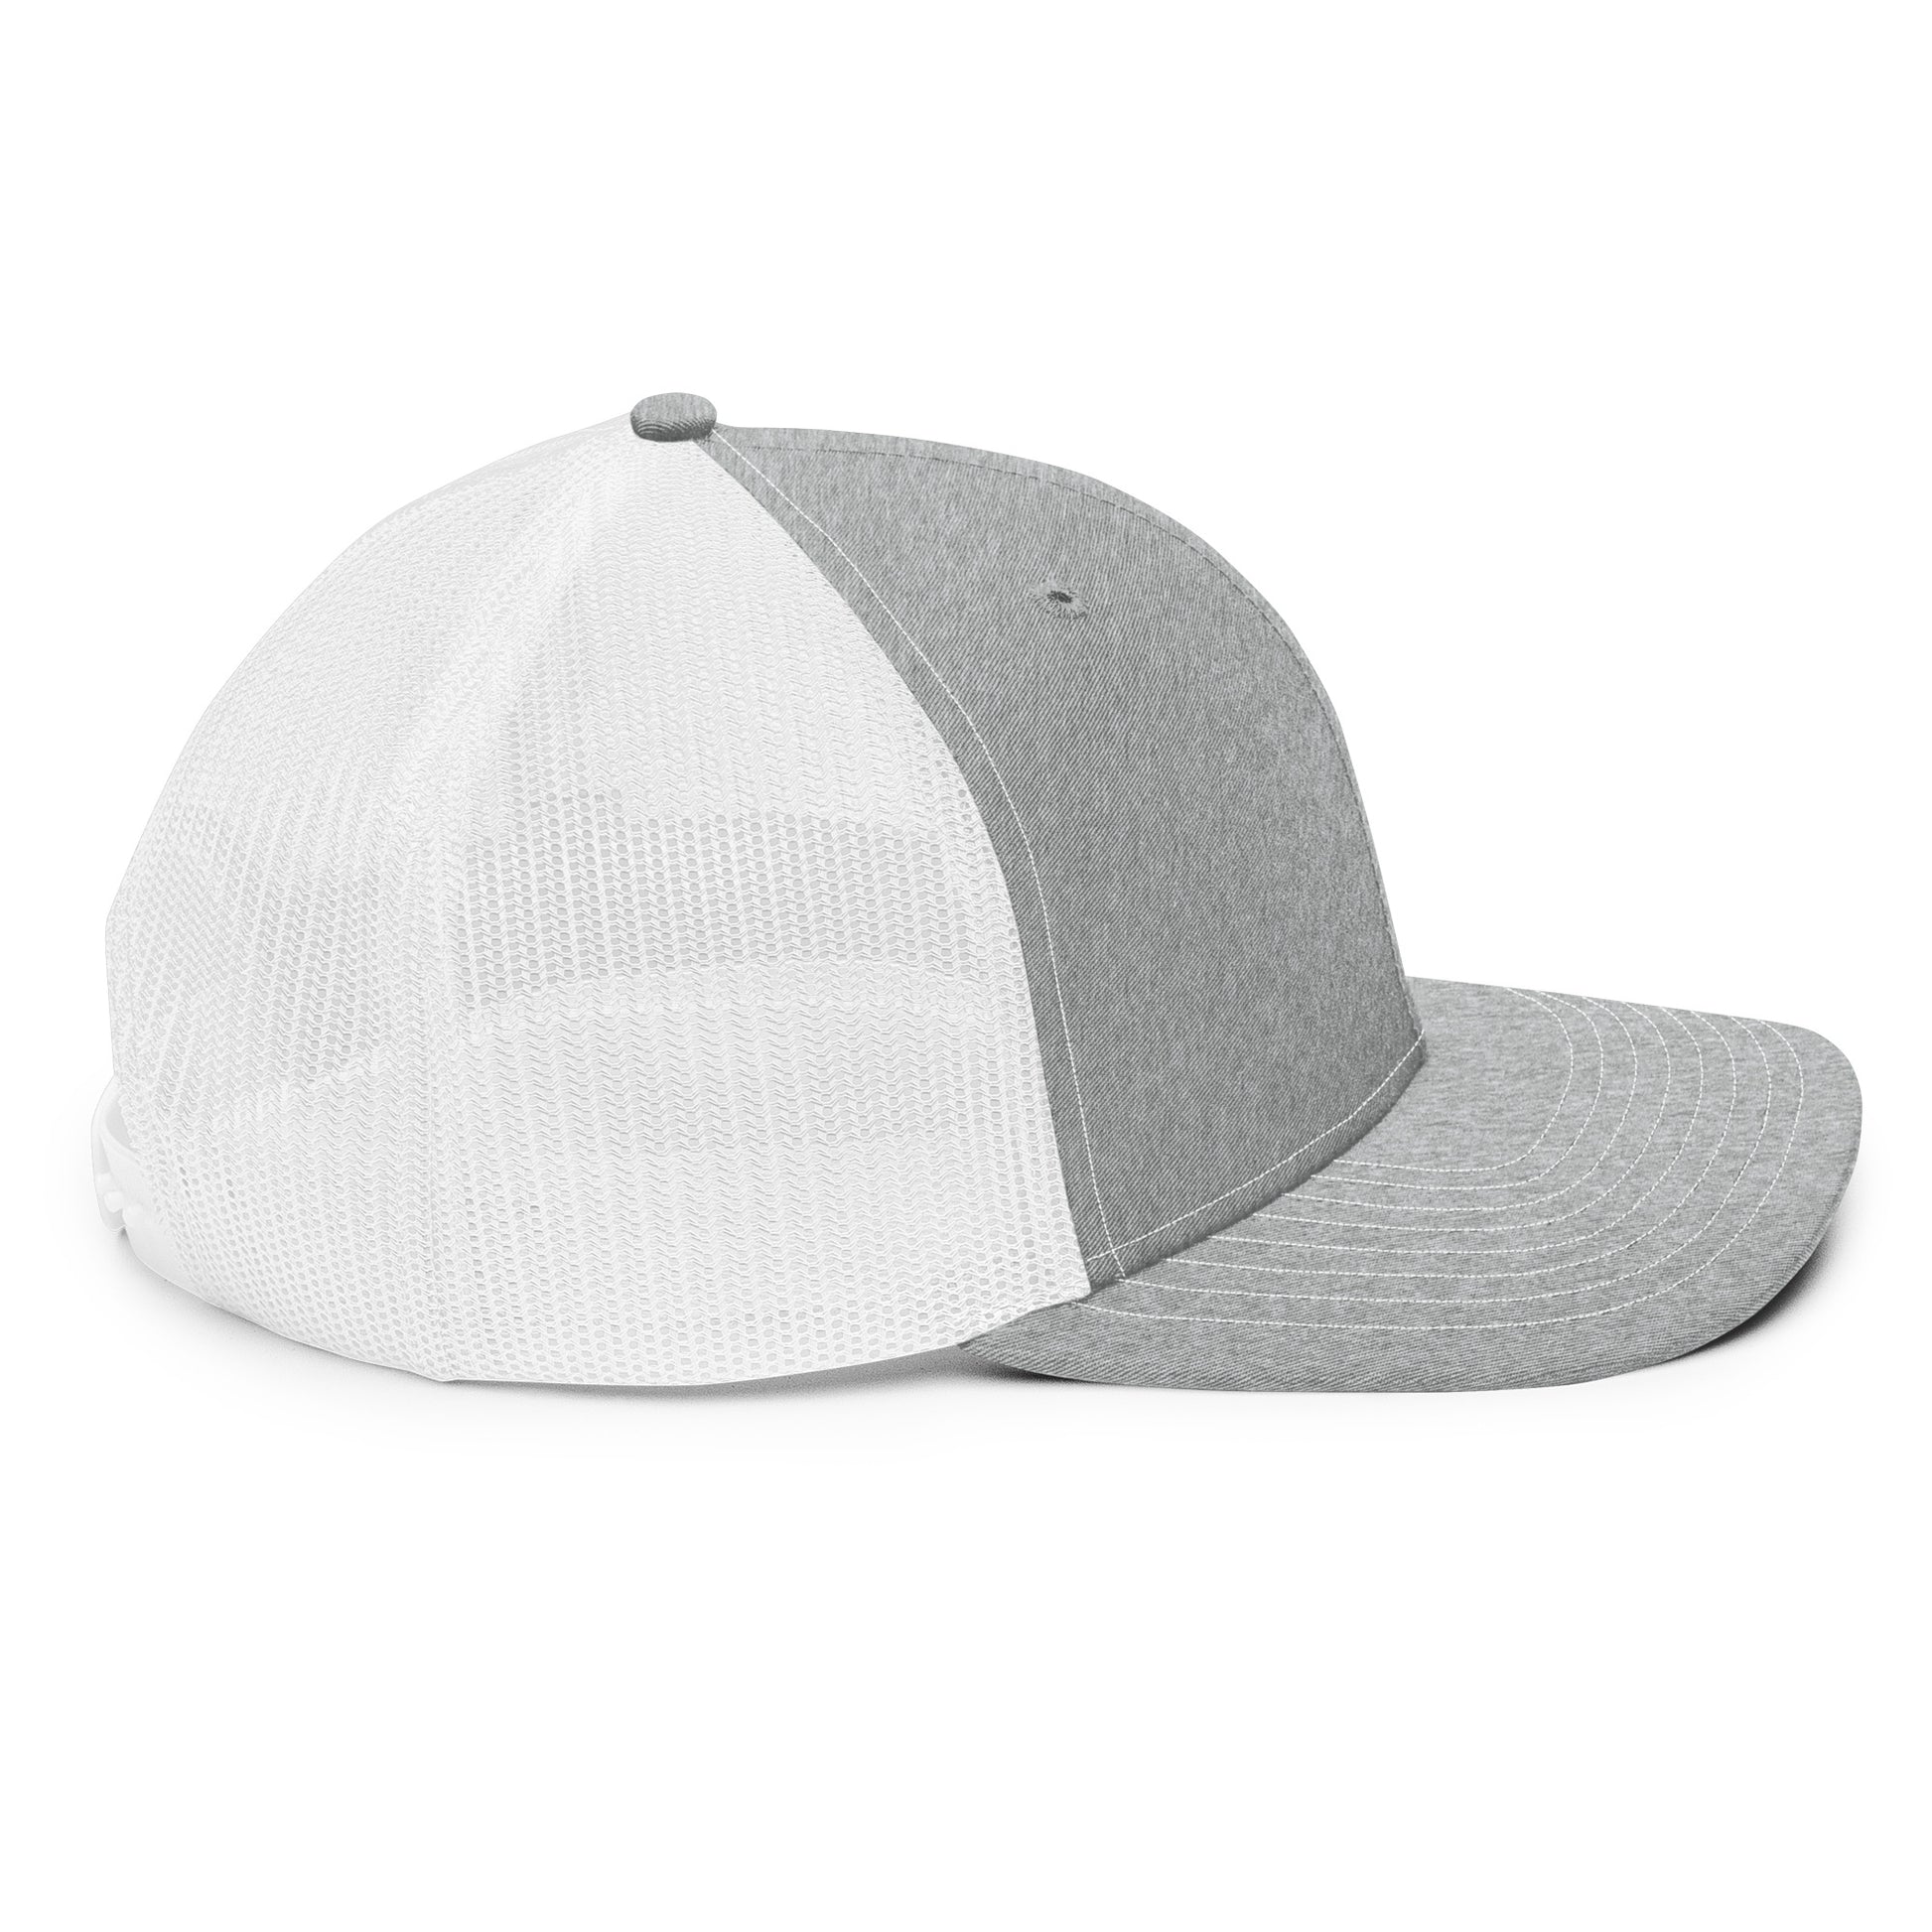 a grey and white hat on a white background